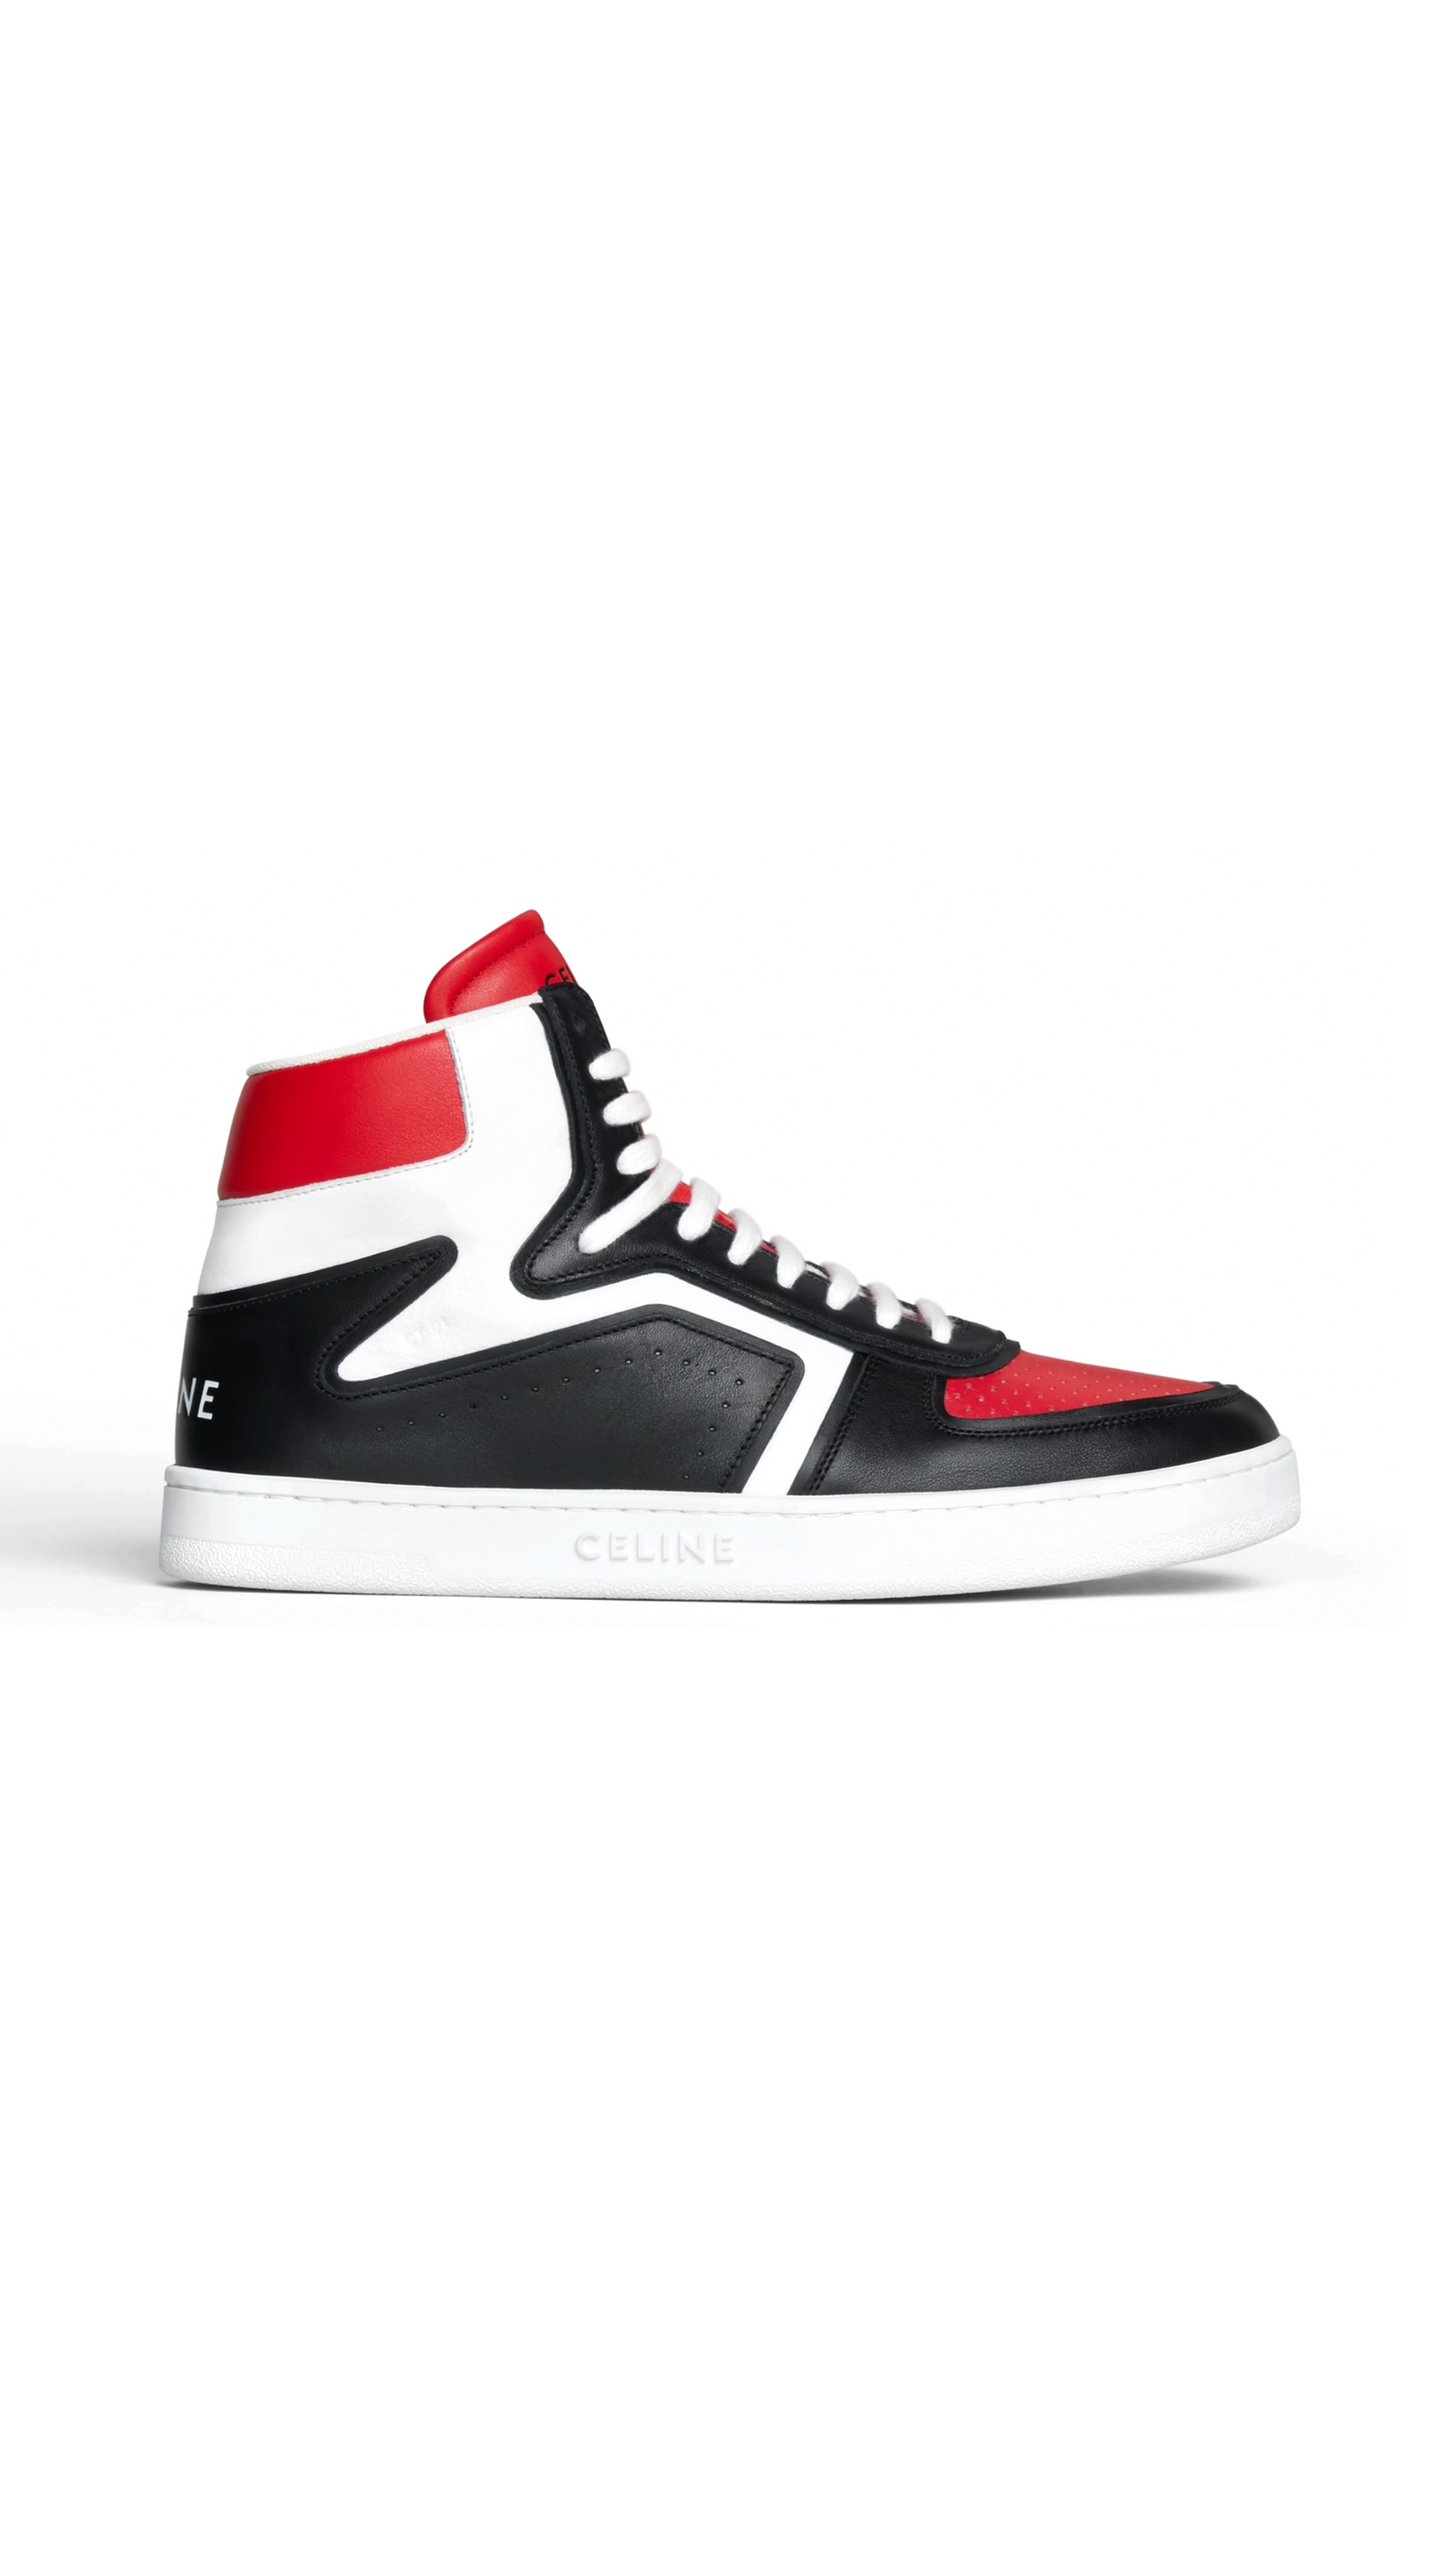 CT-01 "Z" Trainer High Top Sneaker "In Calfskin - Black / Red / White